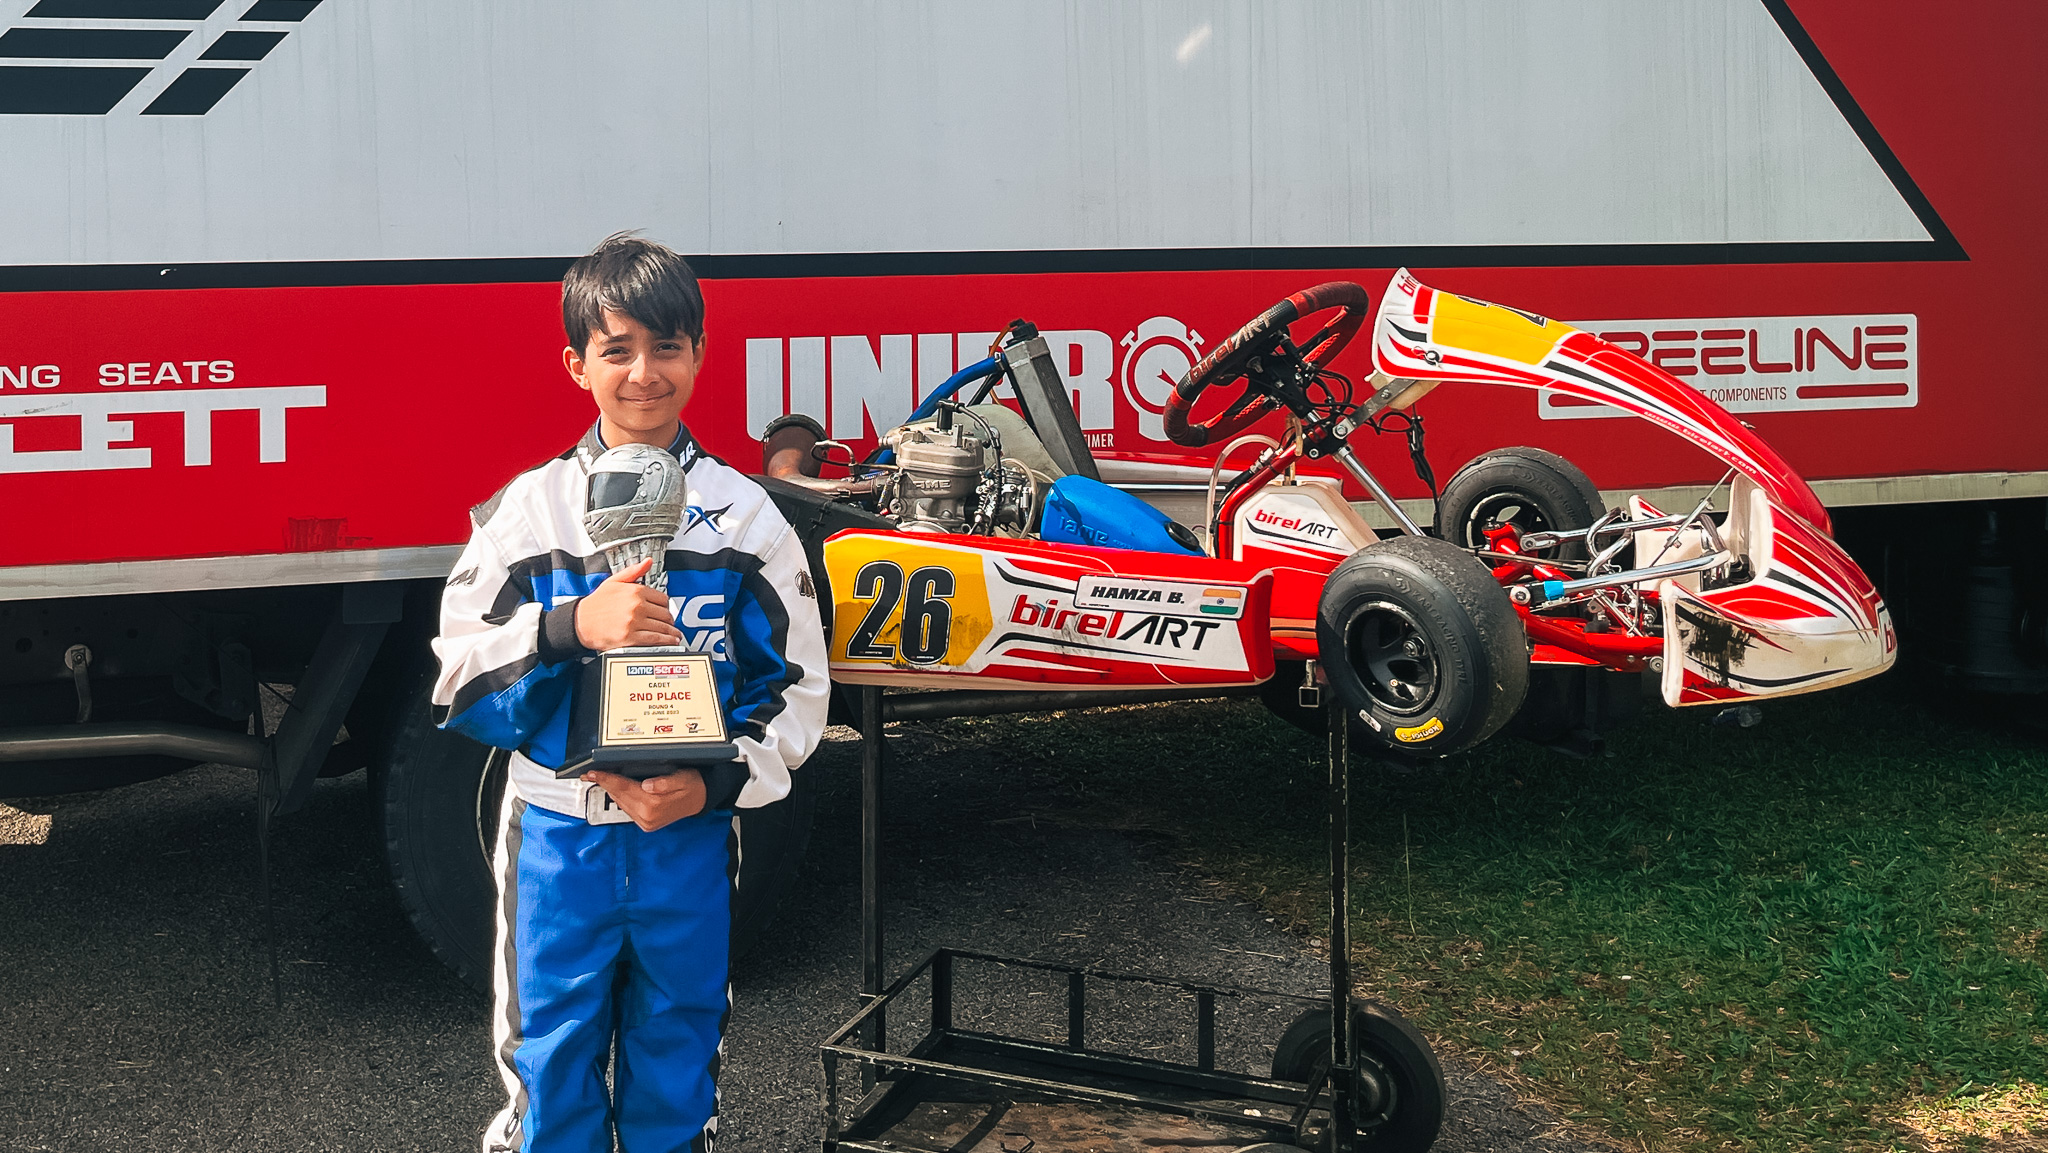 Mumbai’s 11-year-old Hamza takes second place in Asia’s prestigious X30 Championship in Sepang